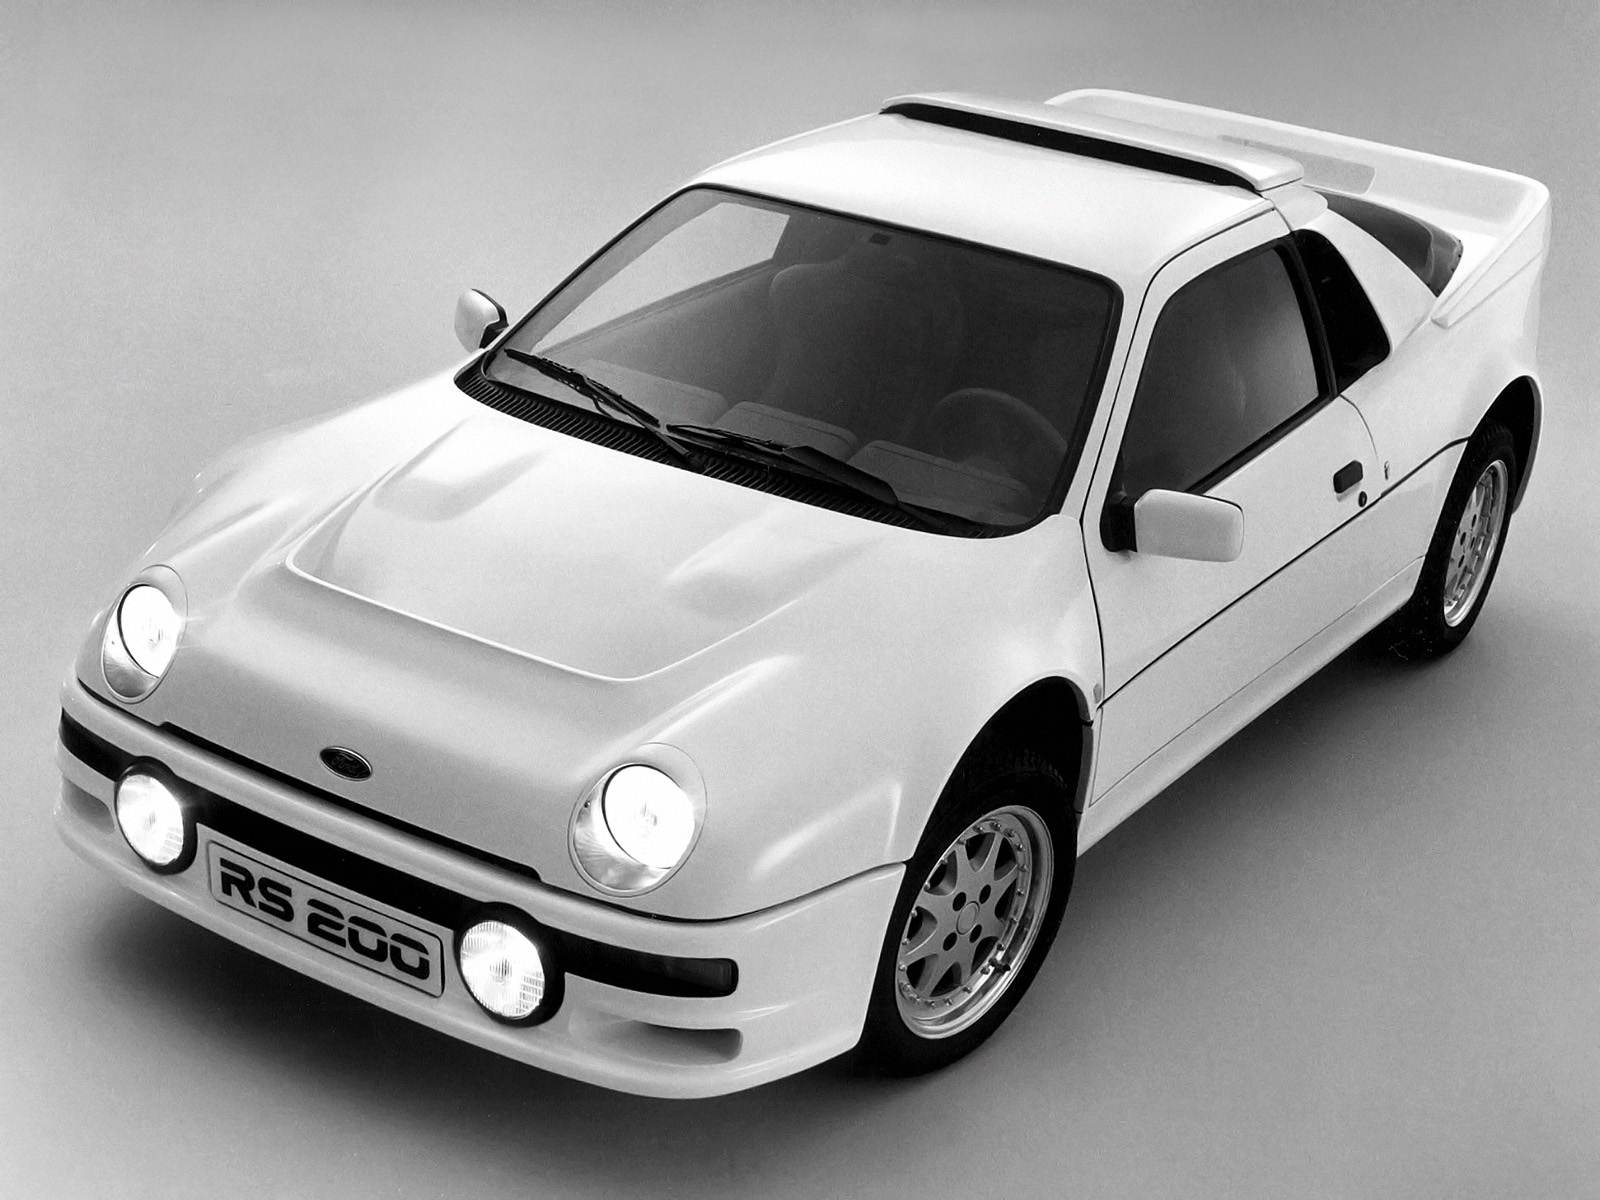 1984, Ford, Rs200 Wallpaper